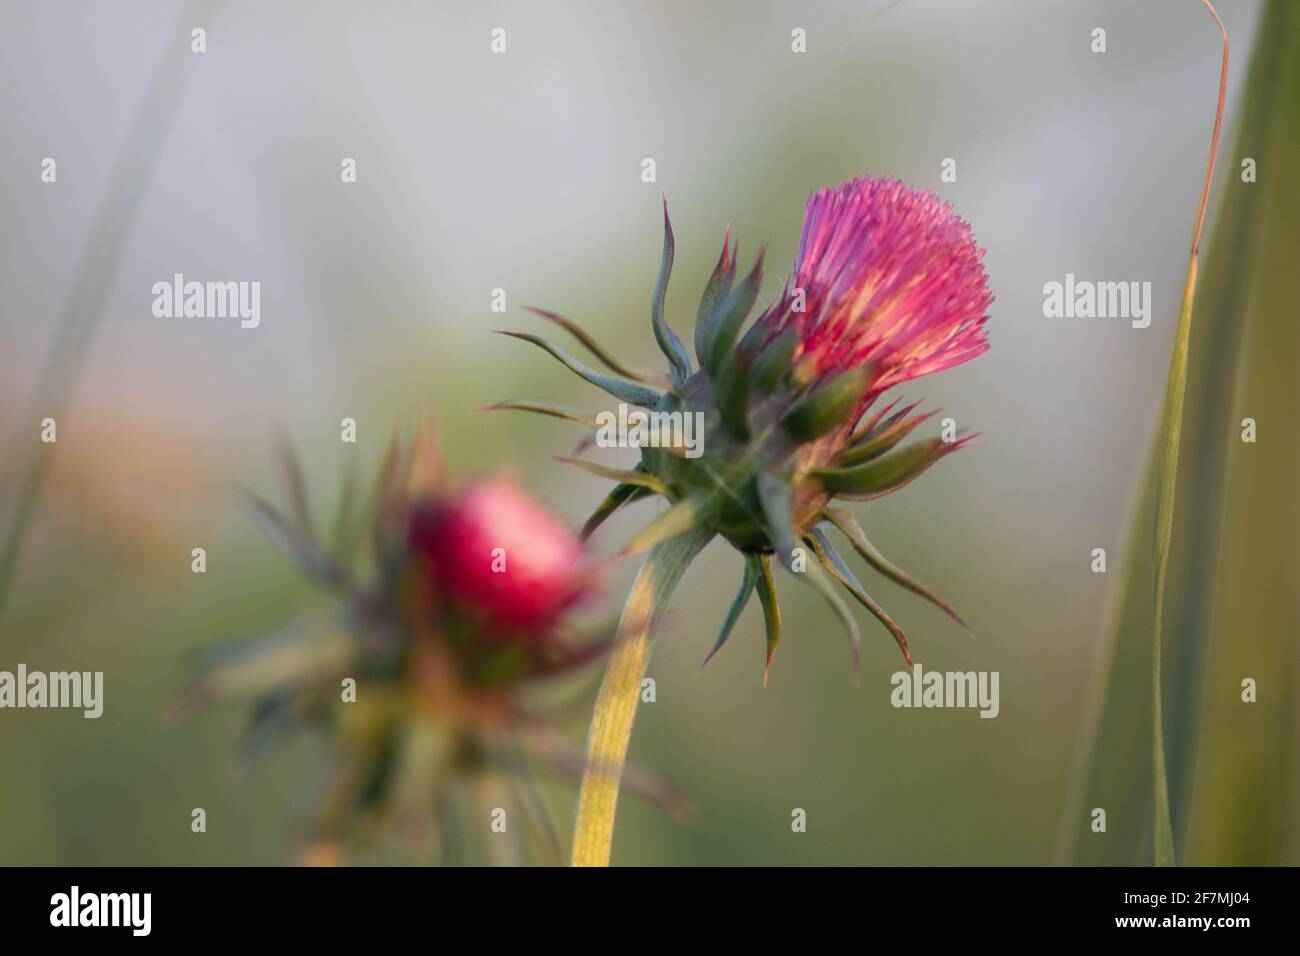 Purple milk thistle flower in blurred background, Italy Stock Photo